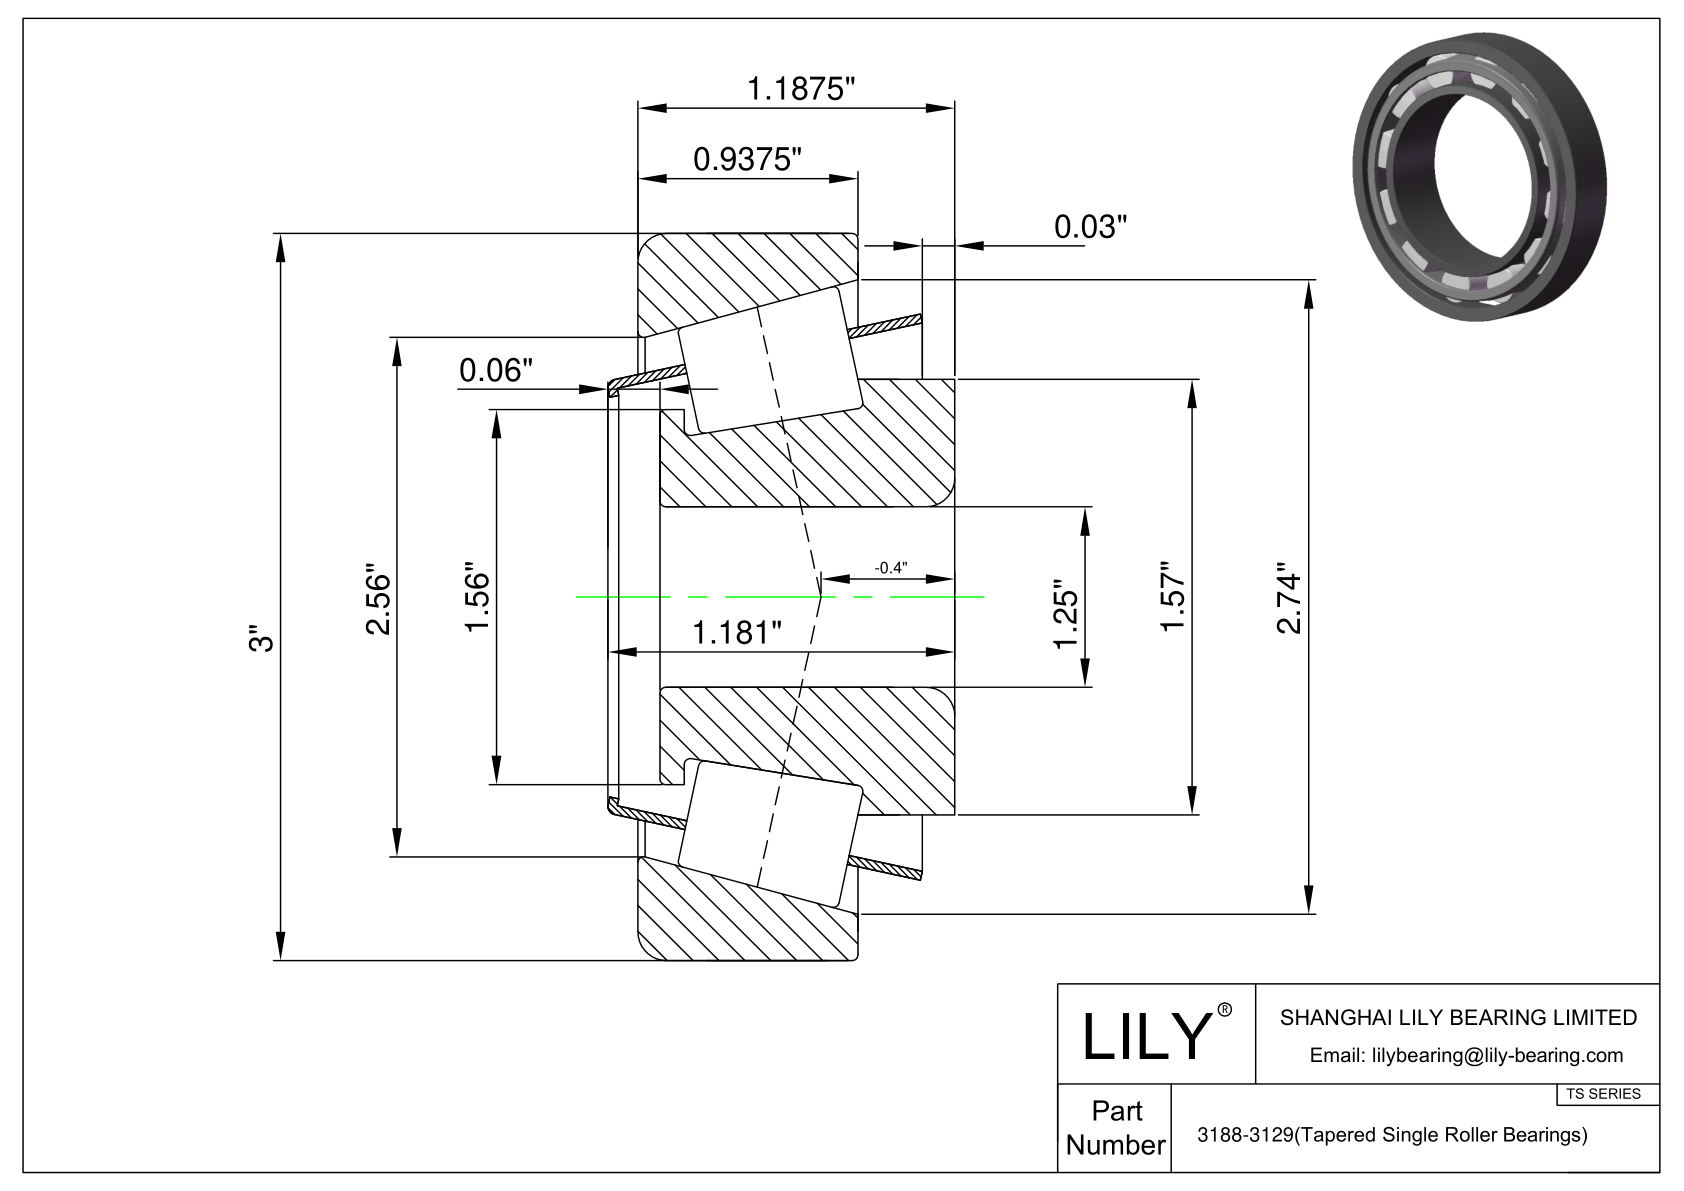 3188-3129 TS (Tapered Single Roller Bearings) (Imperial) cad drawing